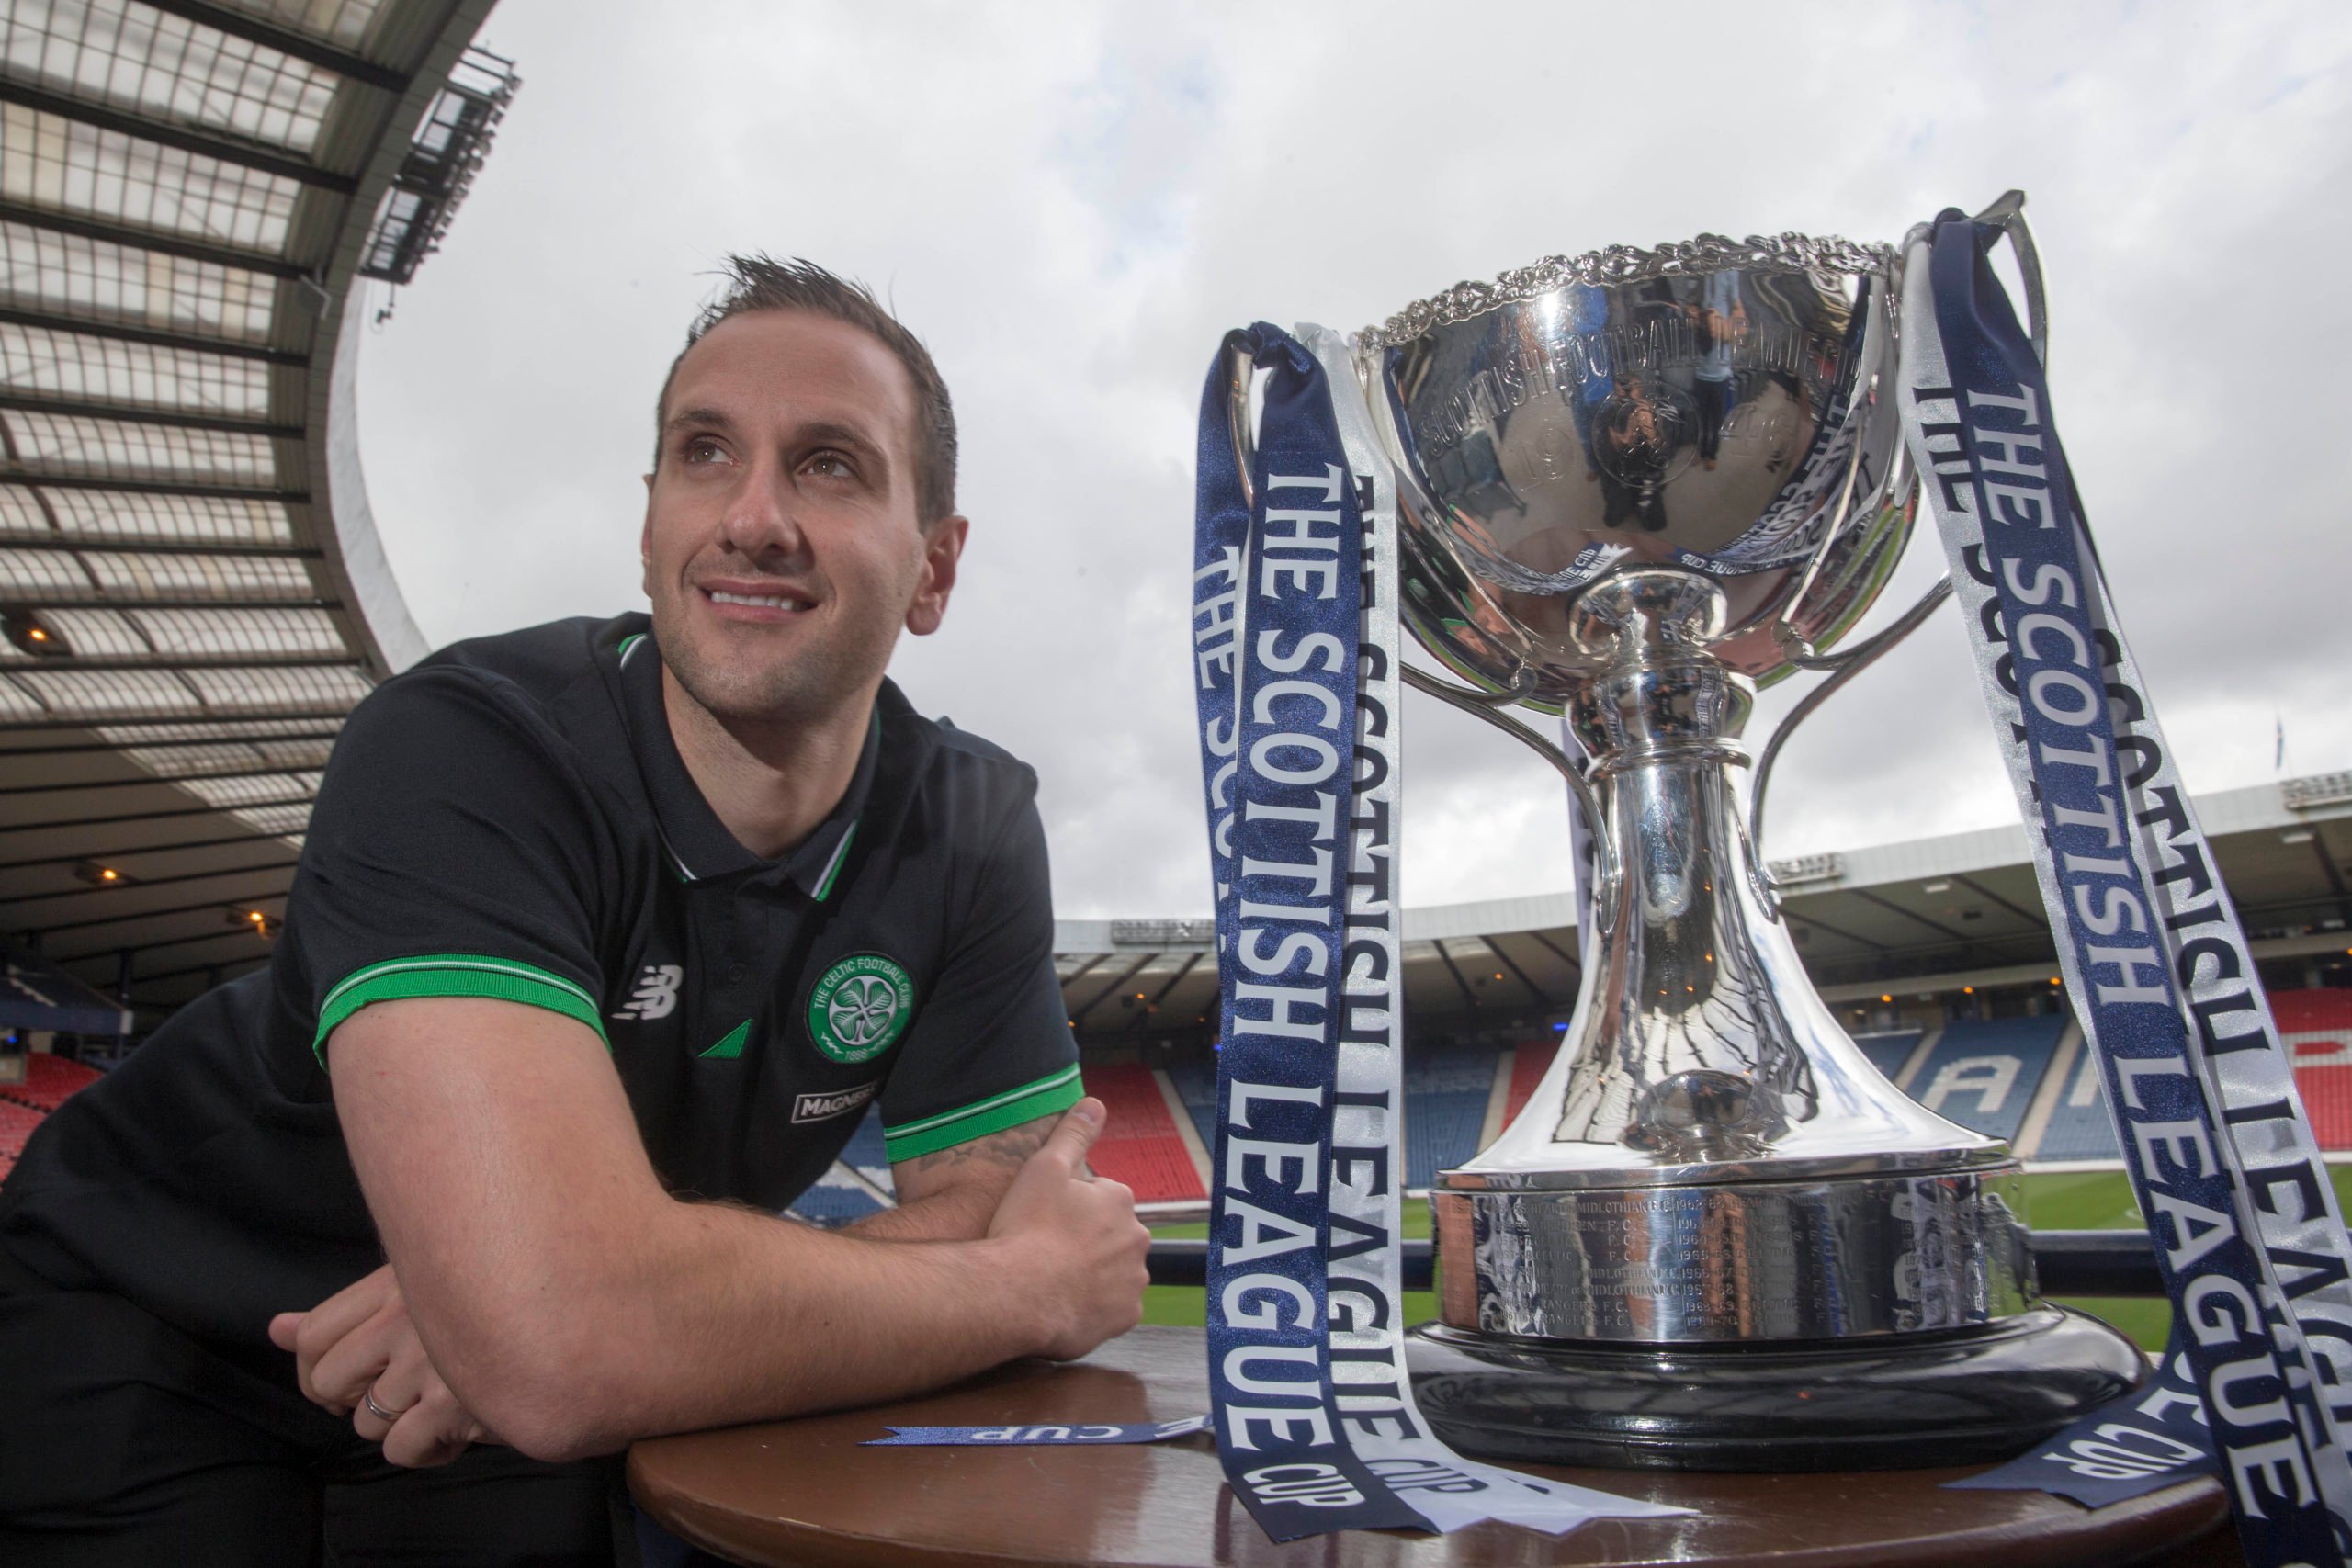 How Celtic interim boss John Kennedy deals with Glasgow Derby could set him up for career